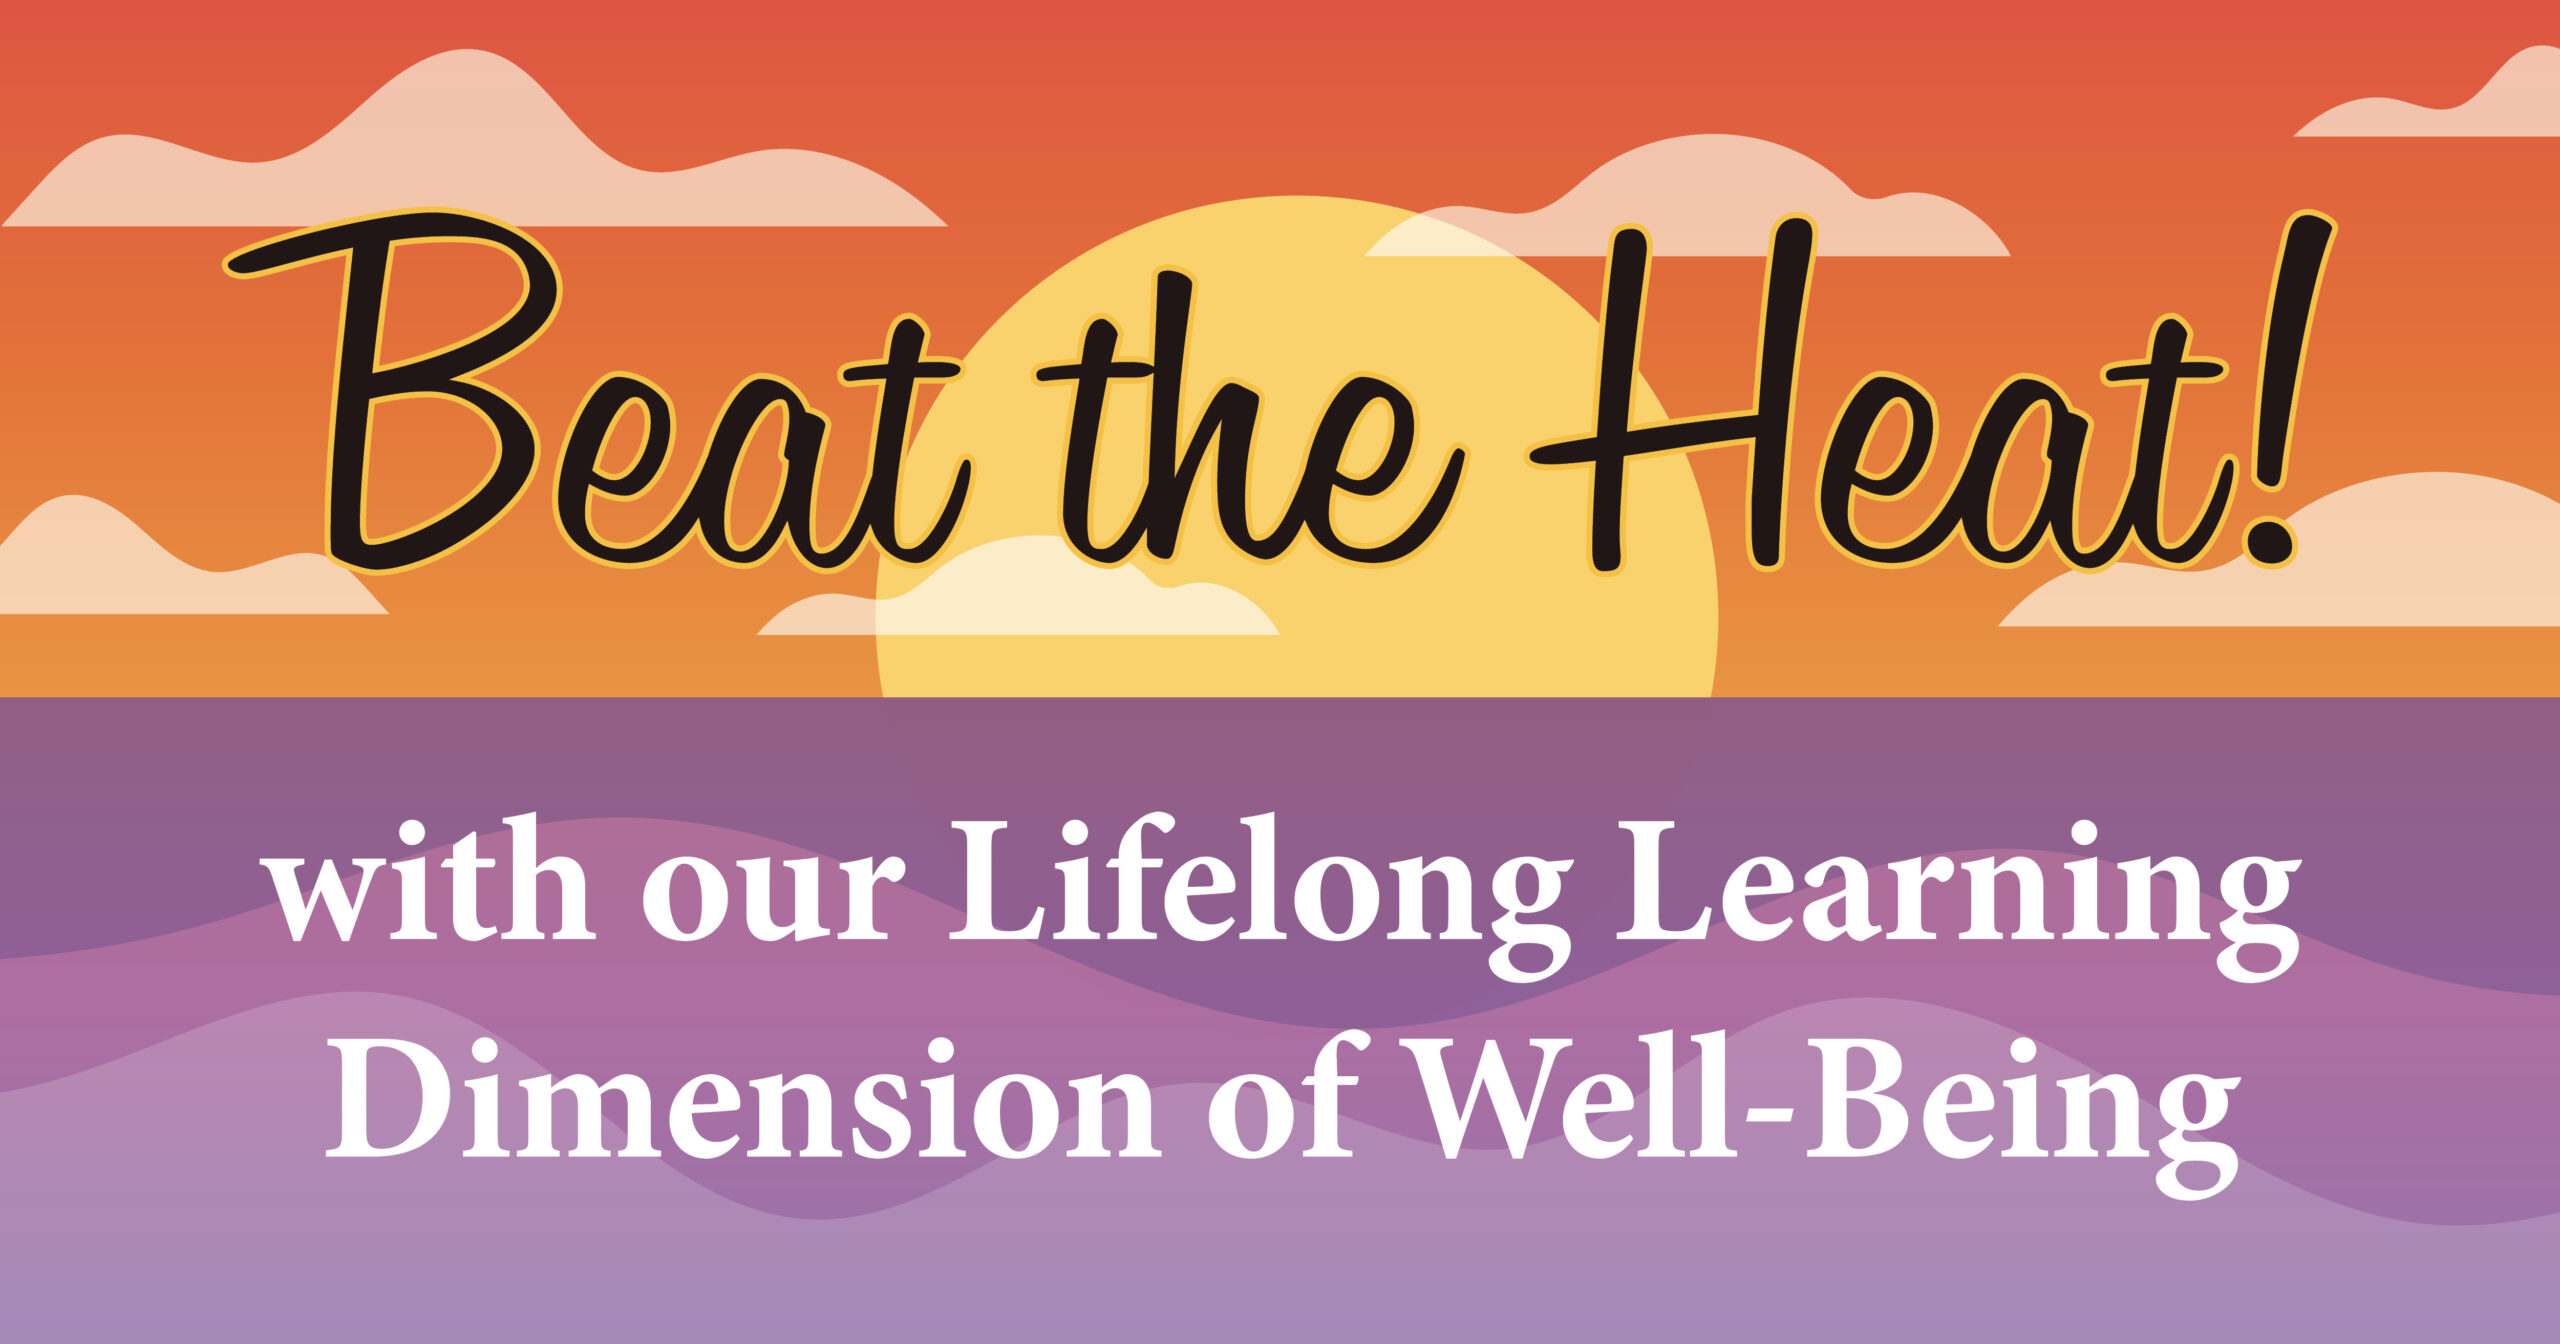 Beat the Heat with our Lifelong Learning Dimension of Well-Being